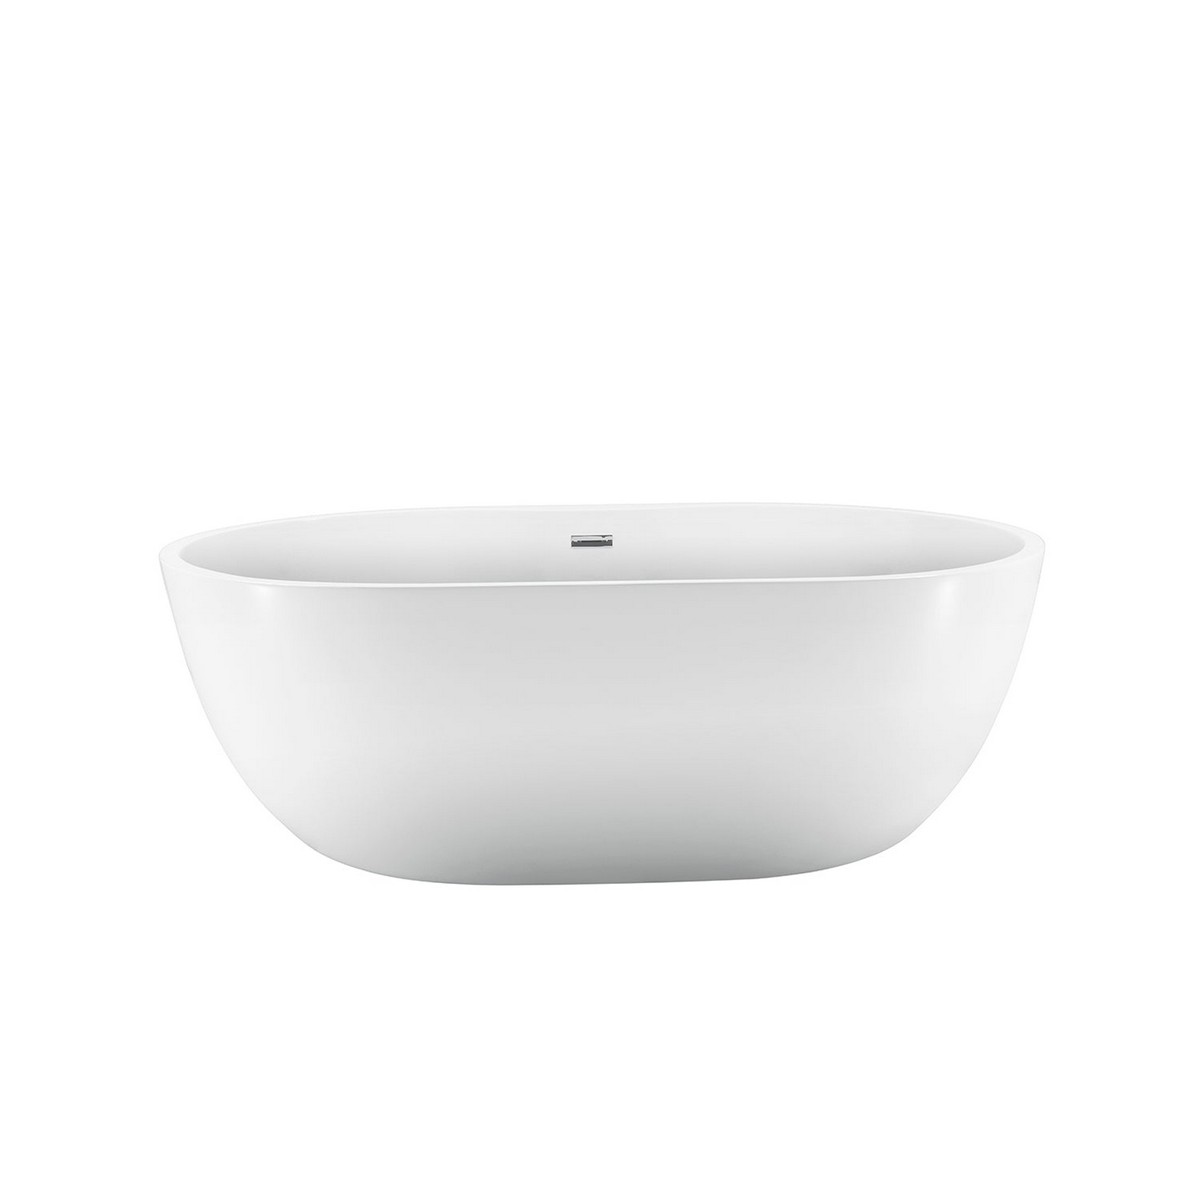 BARCLAY ATOVN71WIG PIPER 70 7/8 INCH ACRYLIC FREESTANDING OVAL SOAKING EXTRA WIDE BATHTUB IN WHITE WITH INTEGRAL DRAIN AND OVERFLOW